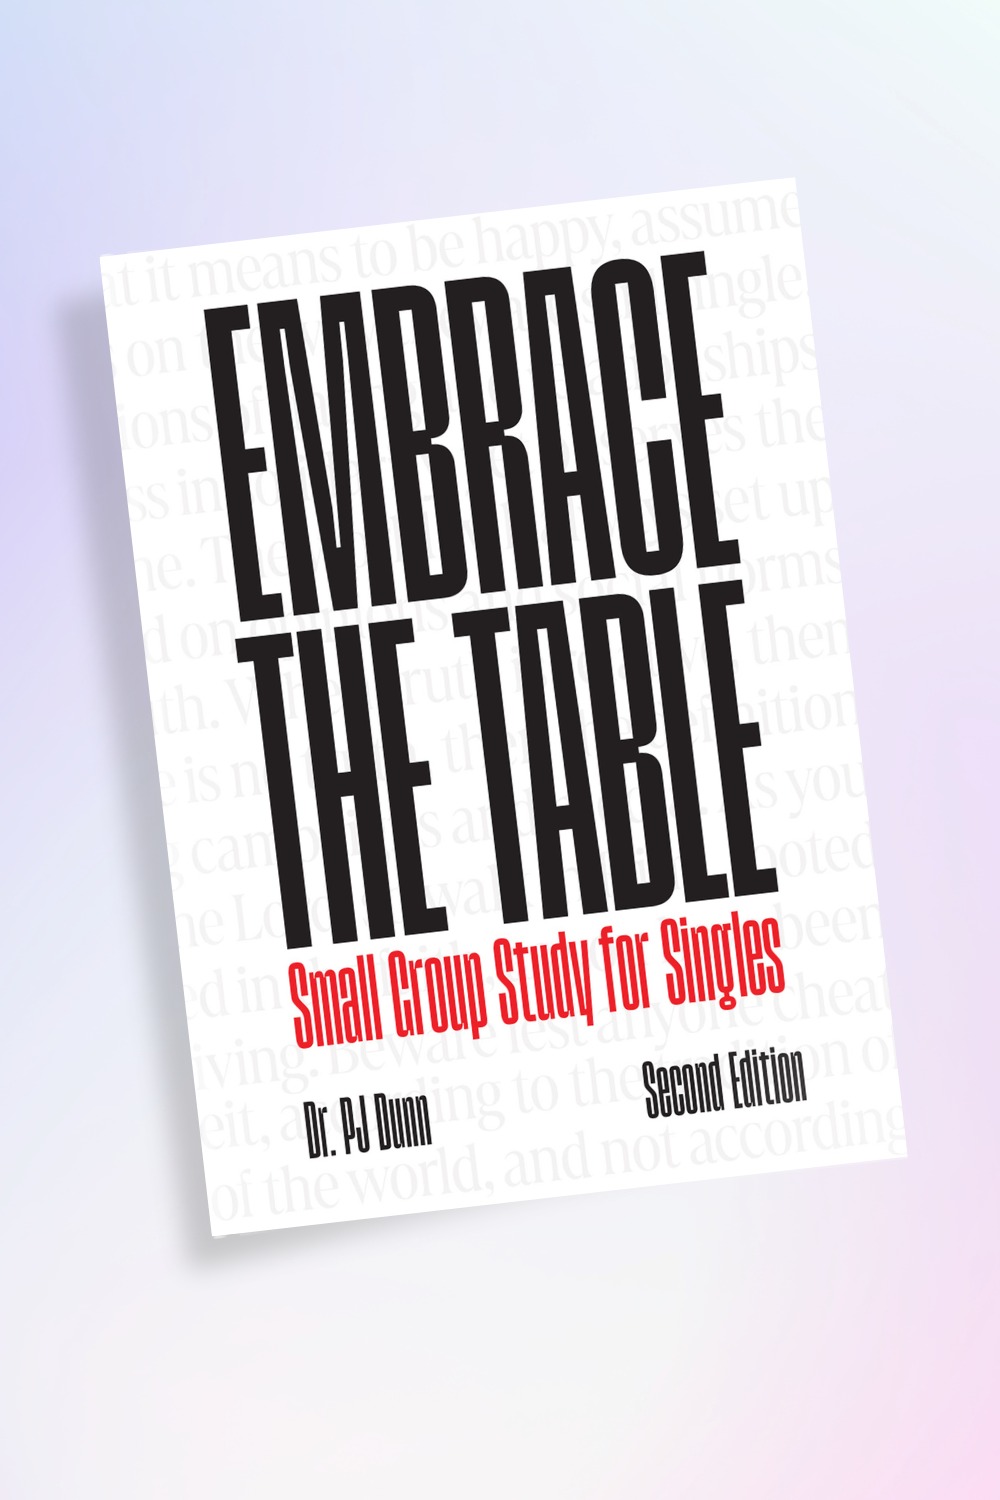 Table for One Ministries - Ministry for Singles and Leaders to Singles - Logo - Be Complete In Christ - singles ministry resources - single adults ministry resources - Single adult bible study - single adult bible studies - Cover